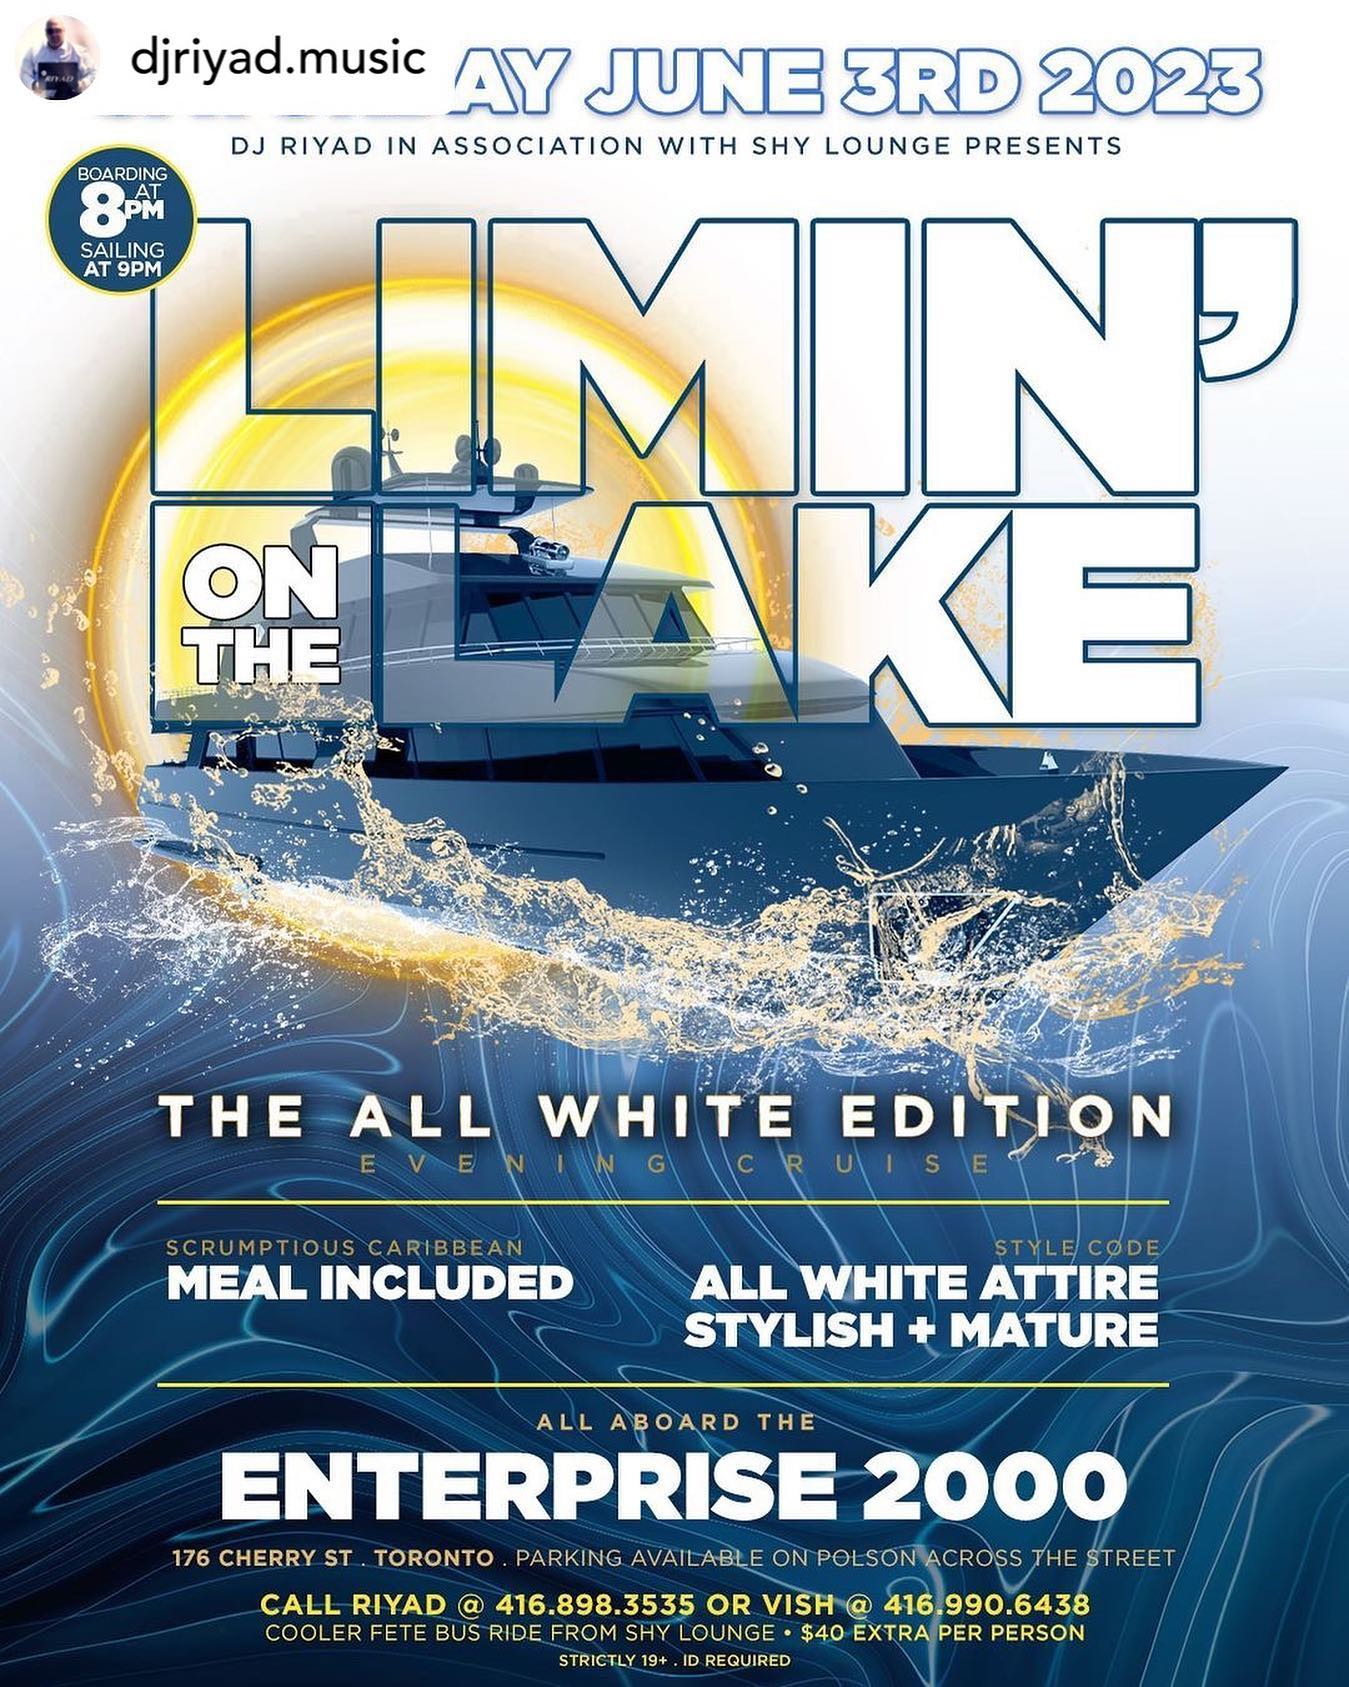 It’s the 2023 edition of the 
ALL WHITE edition LIMIN’ ON THE LAKE
.
𝑫𝒐𝒏’𝒕 𝒎𝒊𝒔𝒔 𝒐𝒖𝒕 𝒐𝒏 𝒐𝒏𝒆 𝒐𝒇 𝒕𝒉𝒆 𝒇𝒊𝒓𝒔𝒕 𝒃𝒐𝒂𝒕 𝒄𝒓𝒖𝒊𝒔𝒆𝒔 𝒐𝒇 𝒕𝒉𝒆 𝒔𝒖𝒎𝒎𝒆𝒓…

Sᴀᴛᴜʀᴅᴀʏ Jᴜɴᴇ 3ʀᴅ 2023

𝐌𝐮𝐬𝐢𝐜 𝐛𝐲… 

- 𝐃𝐣 𝐑𝐢𝐲𝐚𝐝 @djriyad.music 
- 𝐃𝐣 𝐓𝐫𝐢𝐜𝐤𝐲 @trickypromo
- 𝐃𝐣 𝐅𝐮𝐠𝐢𝐭𝐢𝐯𝐞 @djfugitive
- 𝐃𝐚𝐧𝐜𝐞𝐡𝐚𝐥𝐥 @dadancehall
- 𝐃𝐇𝐒 @thepeachspecilist 
- 𝐃𝐣 𝐓𝐞𝐜𝐡𝐦𝐚𝐭𝐢𝐜 @djtechmatic89
- 𝐃𝐣 𝐕𝐢𝐜𝐢𝐨𝐮𝐬 @dj_vishus
- 𝐃𝐣 𝐓𝐮𝐧 𝐔𝐩 @dj_tunupmusic
- 𝐒𝐞𝐥𝐞𝐜𝐭𝐨𝐫 𝐒𝐏 @selector_sp_toronto 
- 𝐌𝐢𝐚𝐦𝐢 𝐏𝐫𝐨𝐦𝐨 @miami_hh

Aboard the 
🄴🄽🅃🄴🅁🄿🅁🄸🅂🄴 2000 
boarding at 176 Cherry Street, Toronto

Parking available on Polson Street directly across for boat.

BOARDING TIME: 8PM
RETURN TO DOCK: 1AM 

🅛🅘🅜🅘🅣🅔🅓 🅔🅐🅡🅛🅨🅑🅘🅡🅓 🅣🅘🅒🅚🅔🅣🅢 🎟 
$45 till April 30th and includes a scrumptious Caribbean meal 🥘 provided by Shy Lounge 

For info 416-898-3535